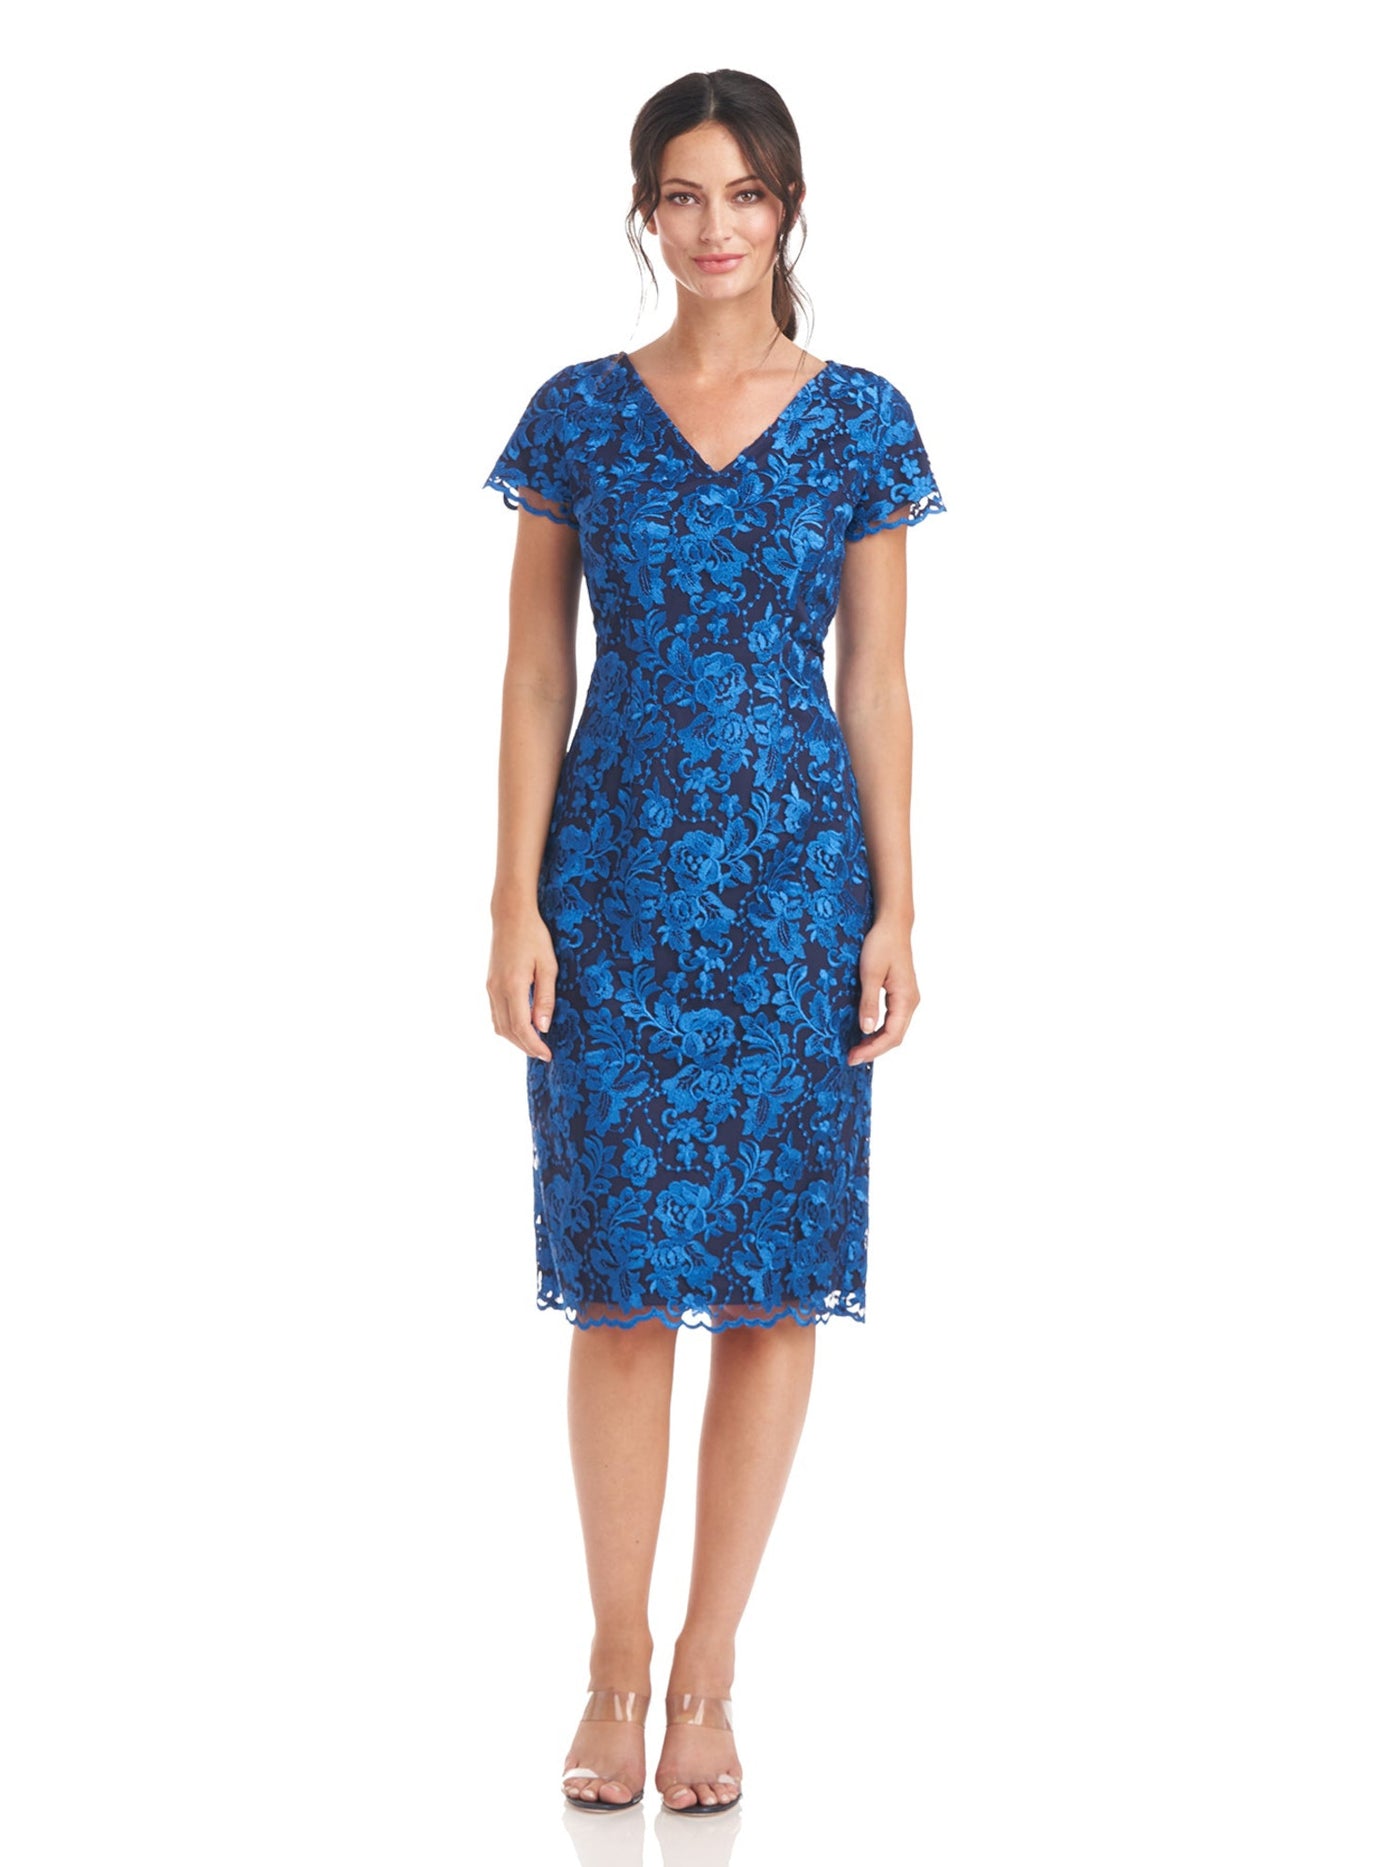 JS COLLECTION Womens Blue Embroidered Zippered Scalloped Mesh Floral Short Sleeve V Neck Below The Knee Party Sheath Dress 2